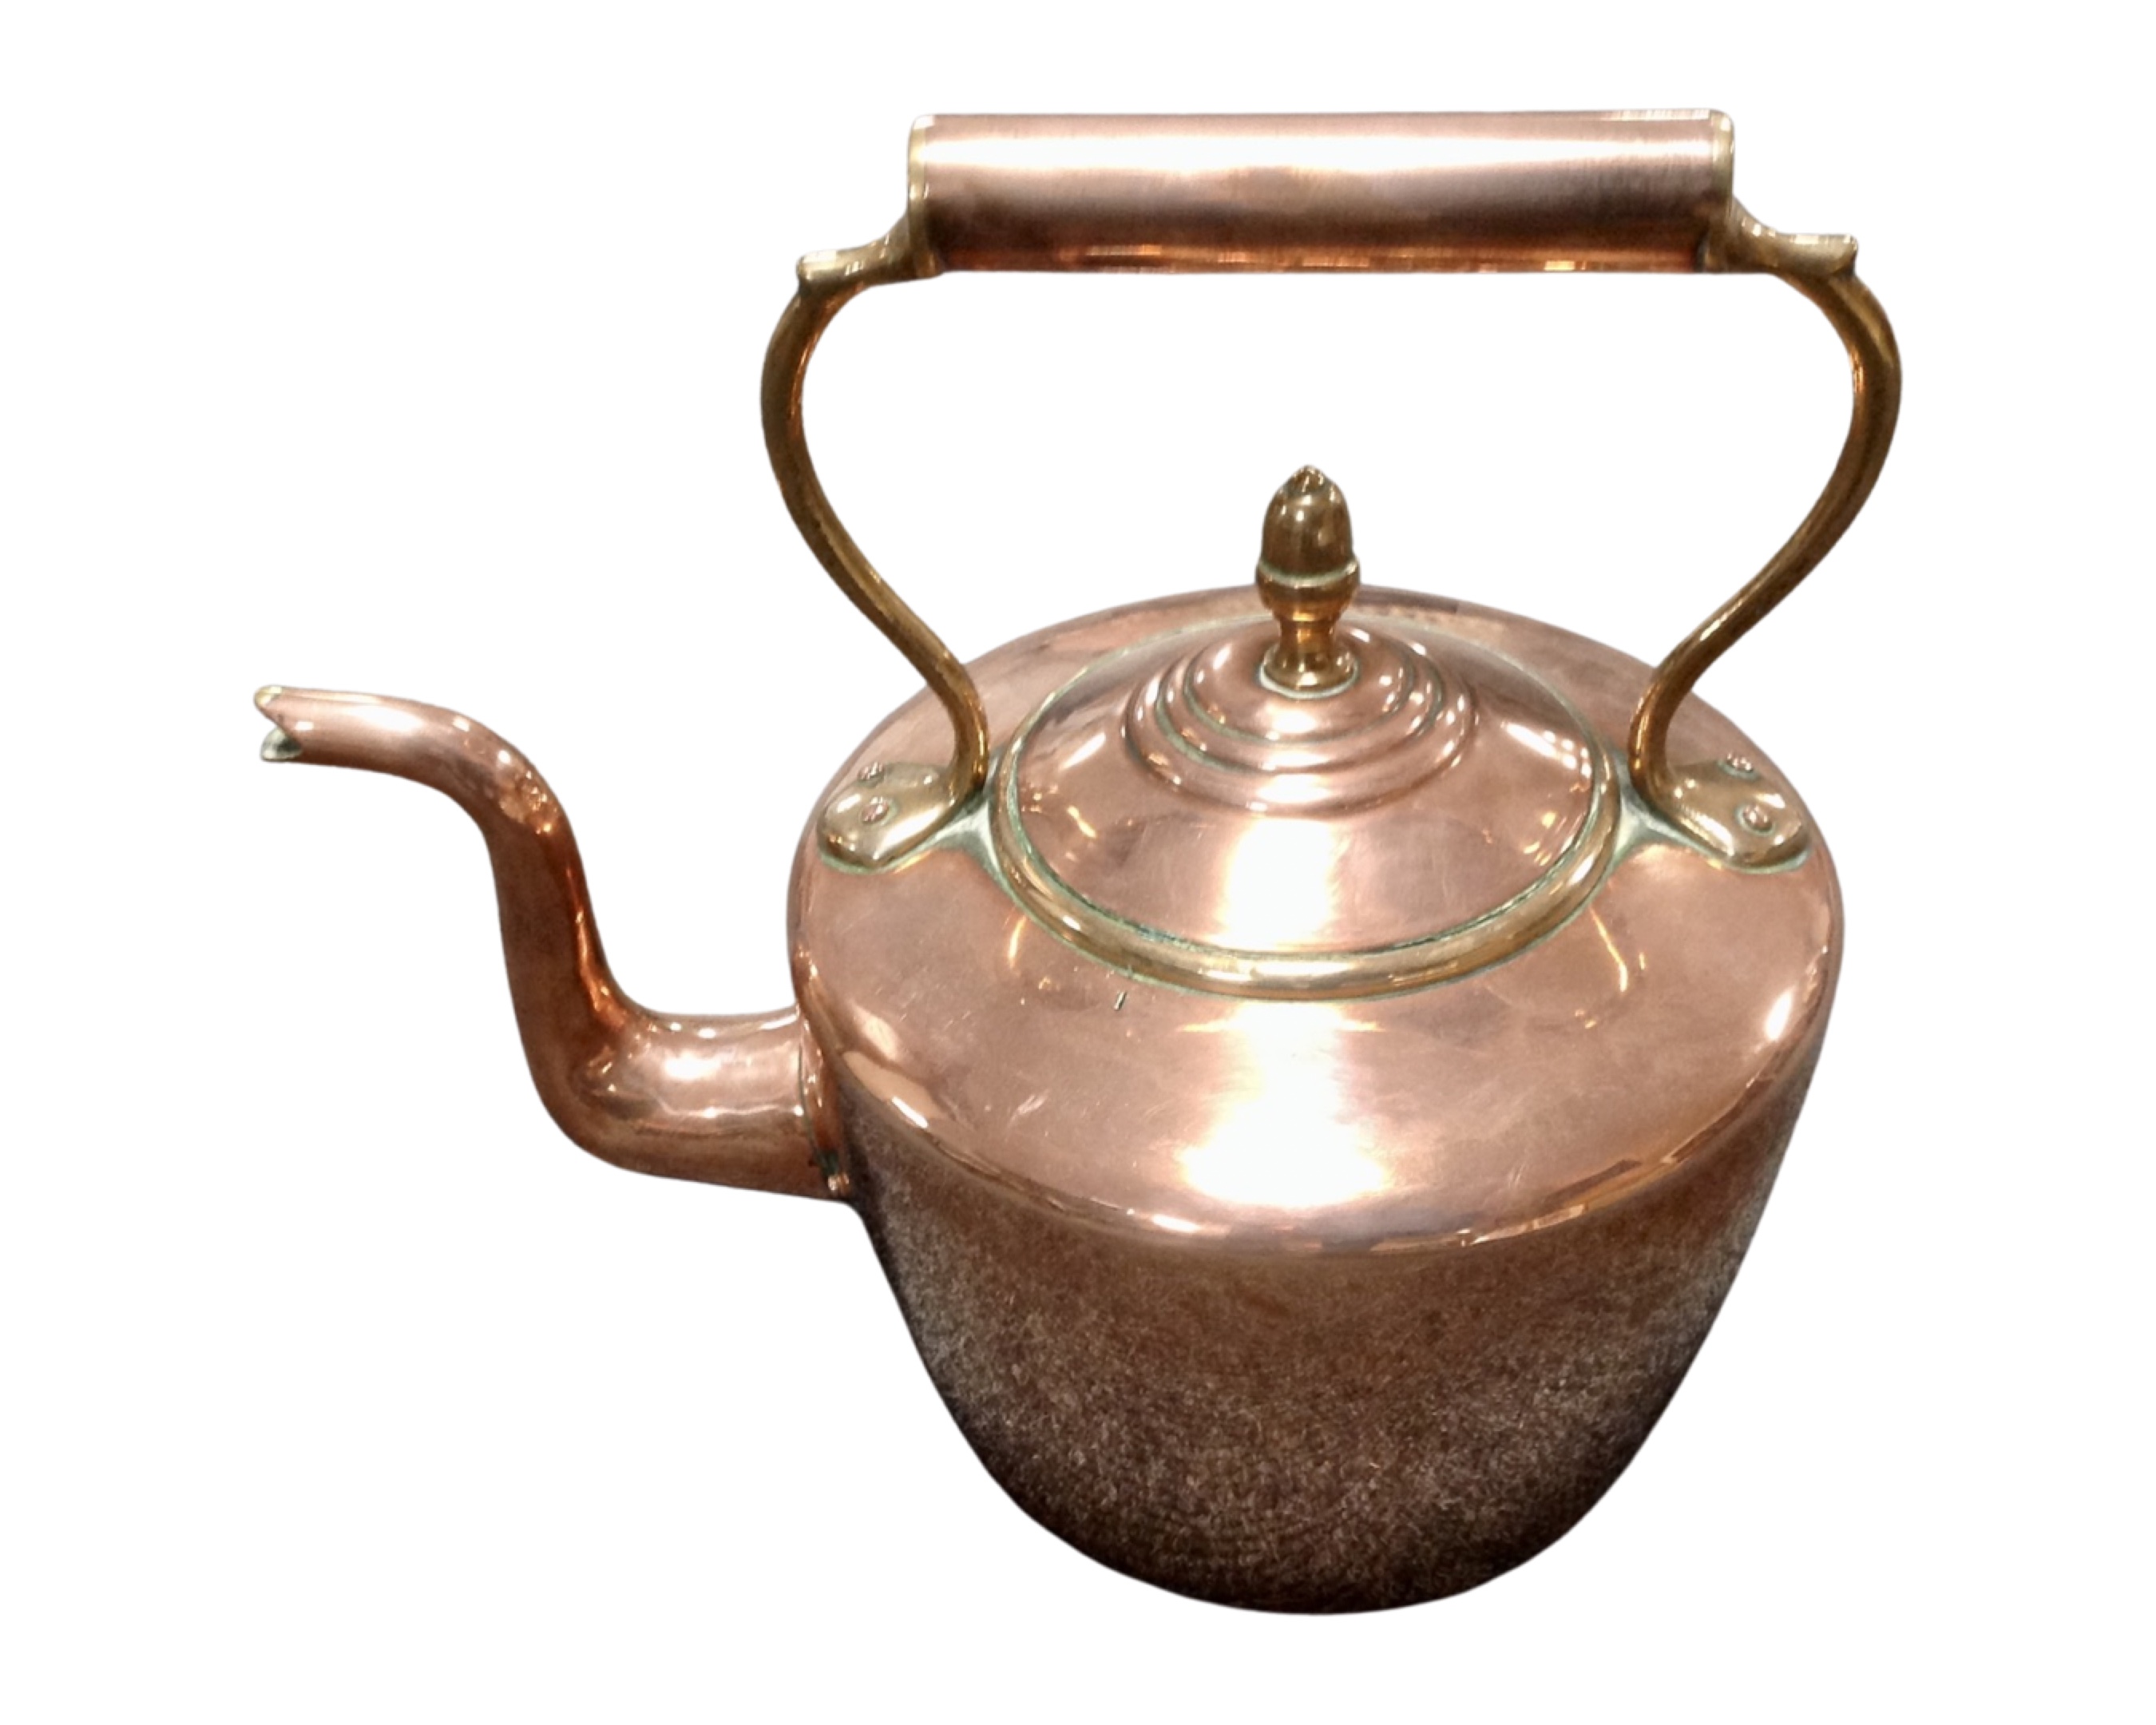 A Victorian copper and brass kettle.